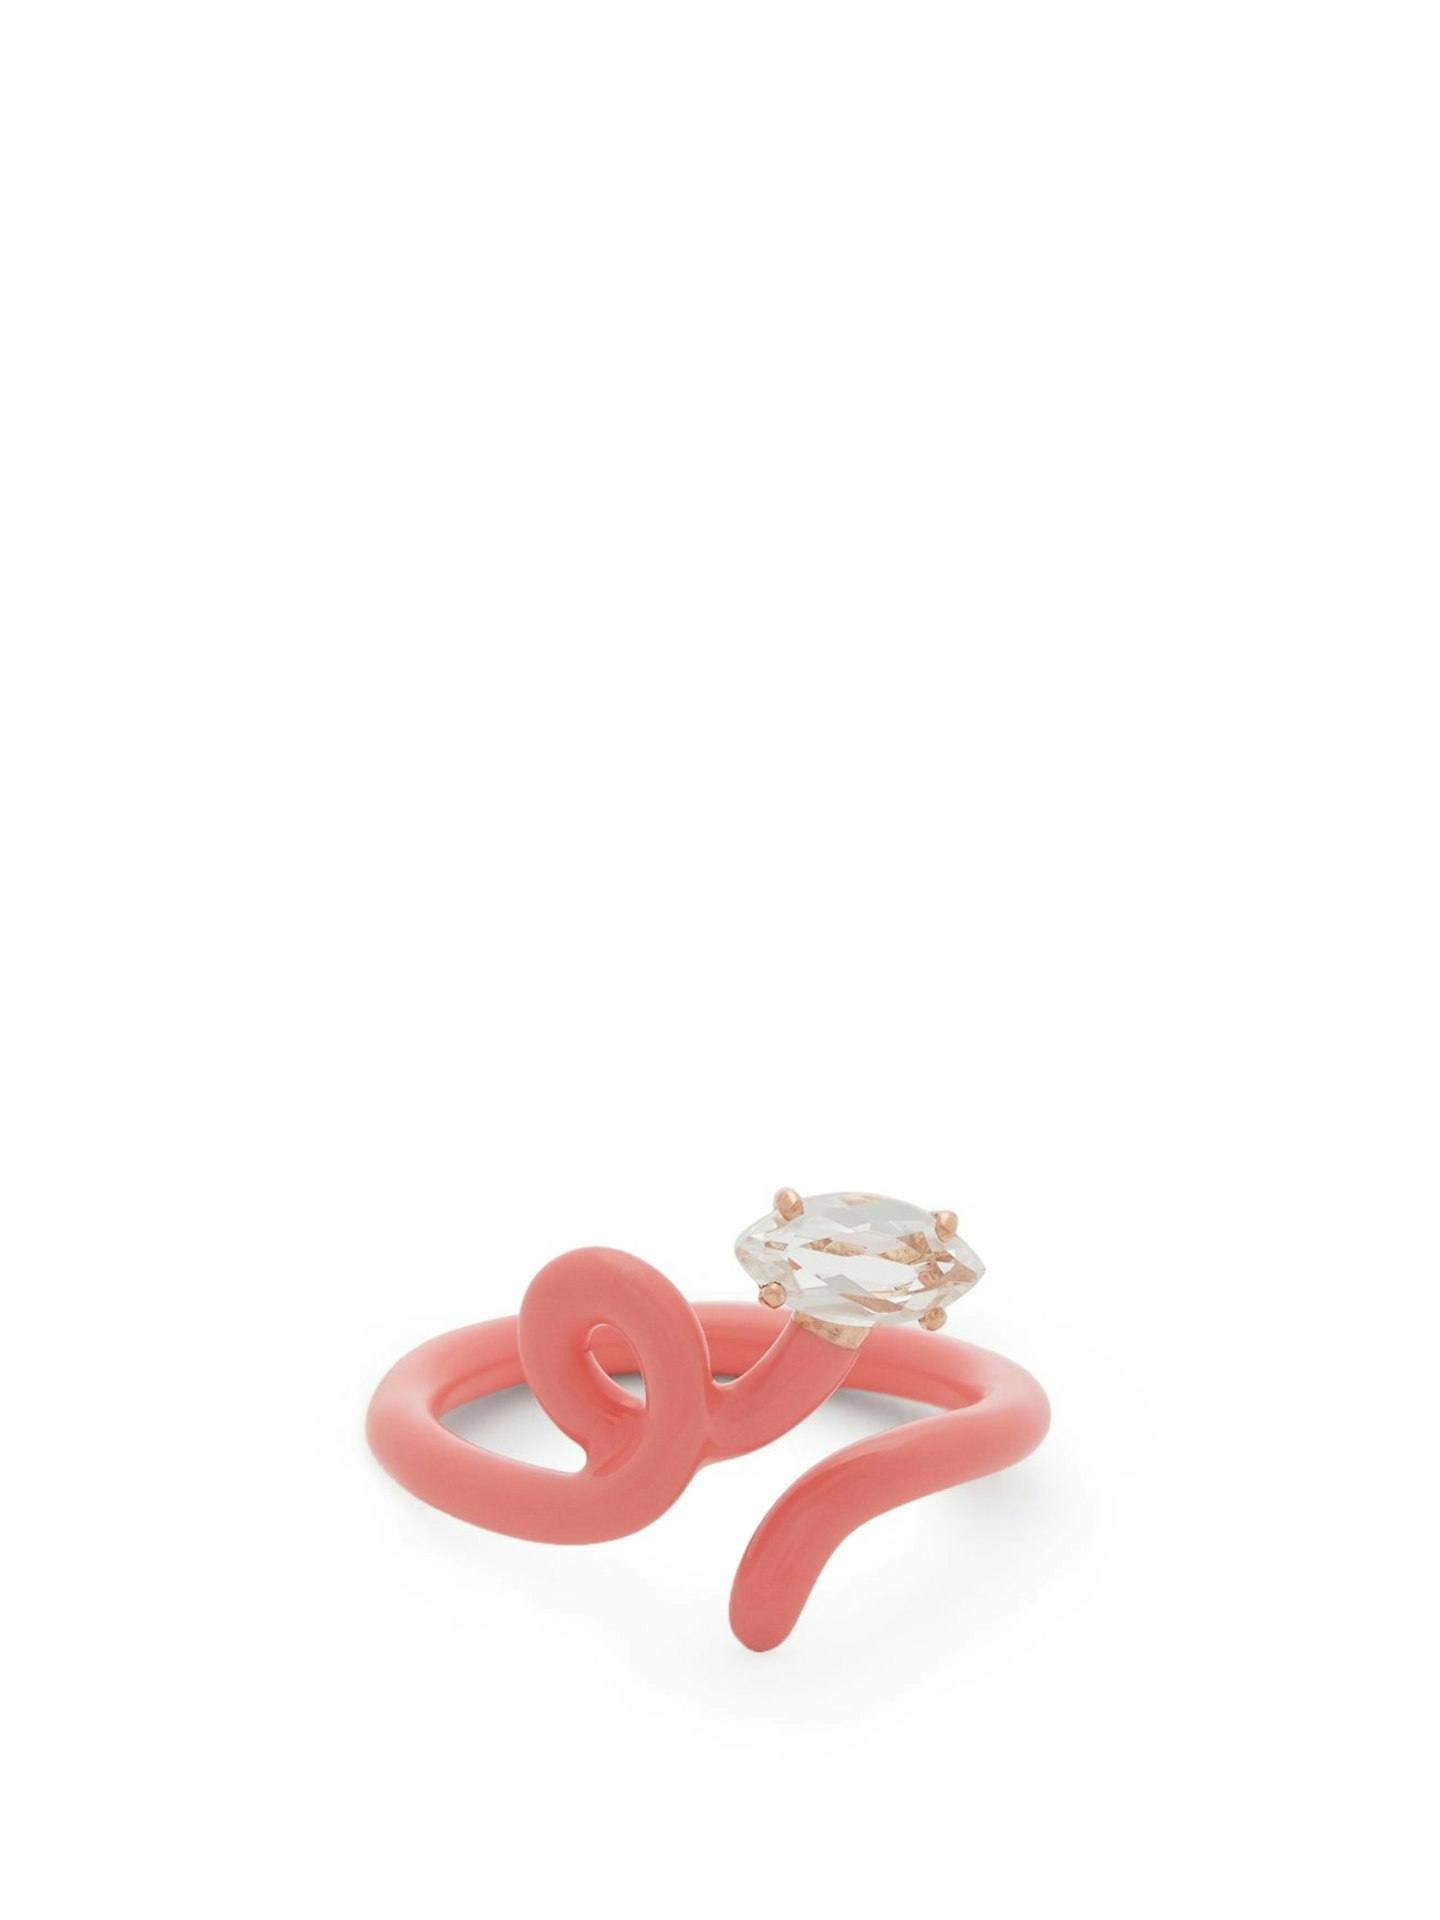 Bea Bongiasca, Baby Vine Tendril crystal & 9kt gold ring, WAS £395 NOW £296.25